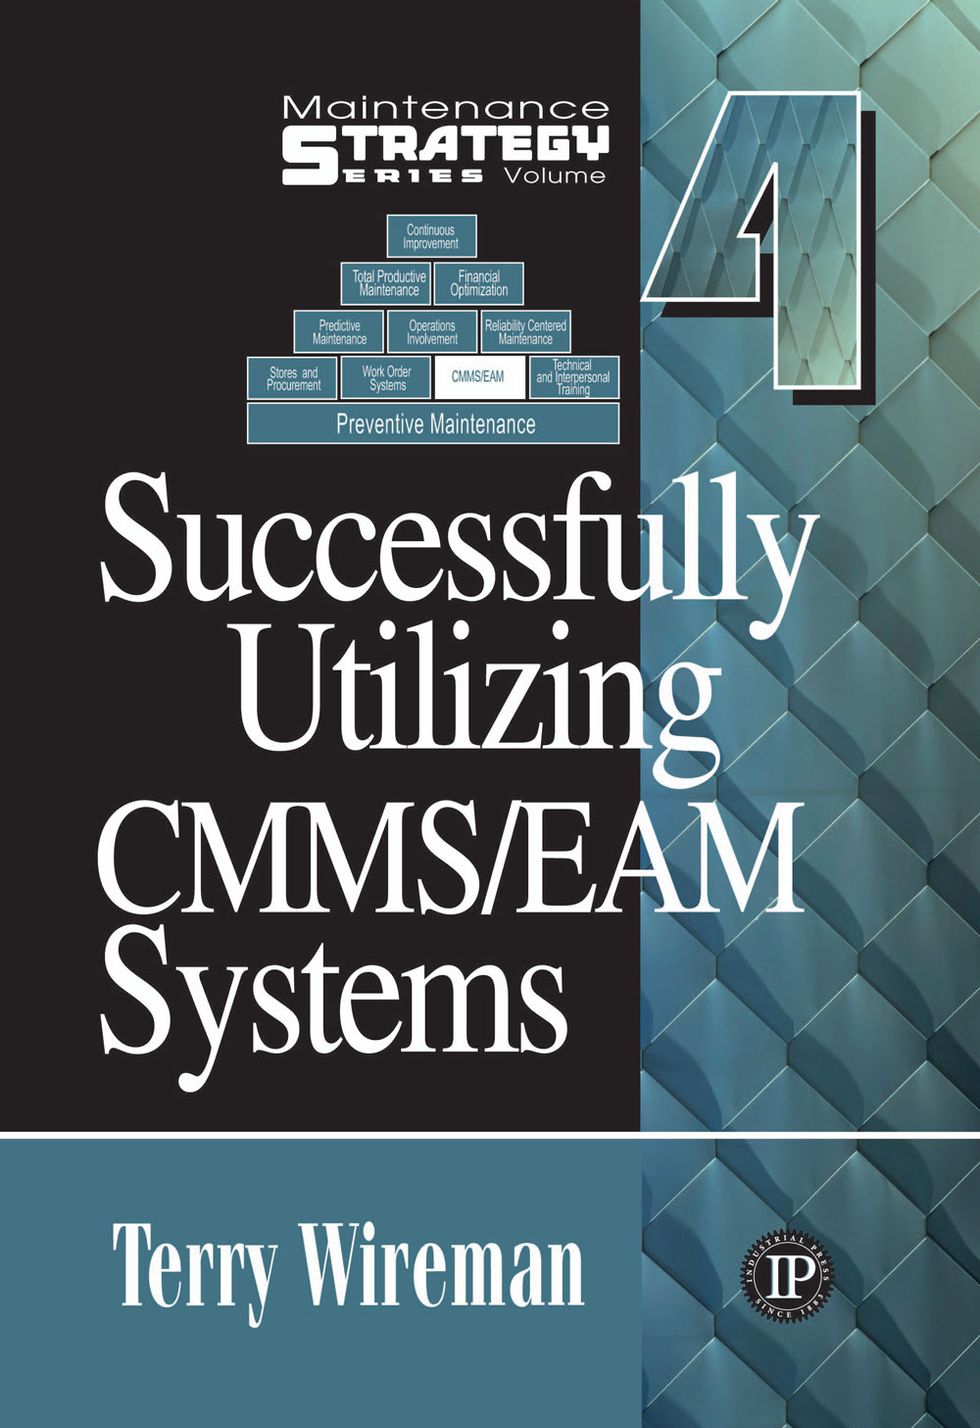  Maintenance Strategy Series Volume 4 - Successfully Utilizing CMMS/EAM Systems 